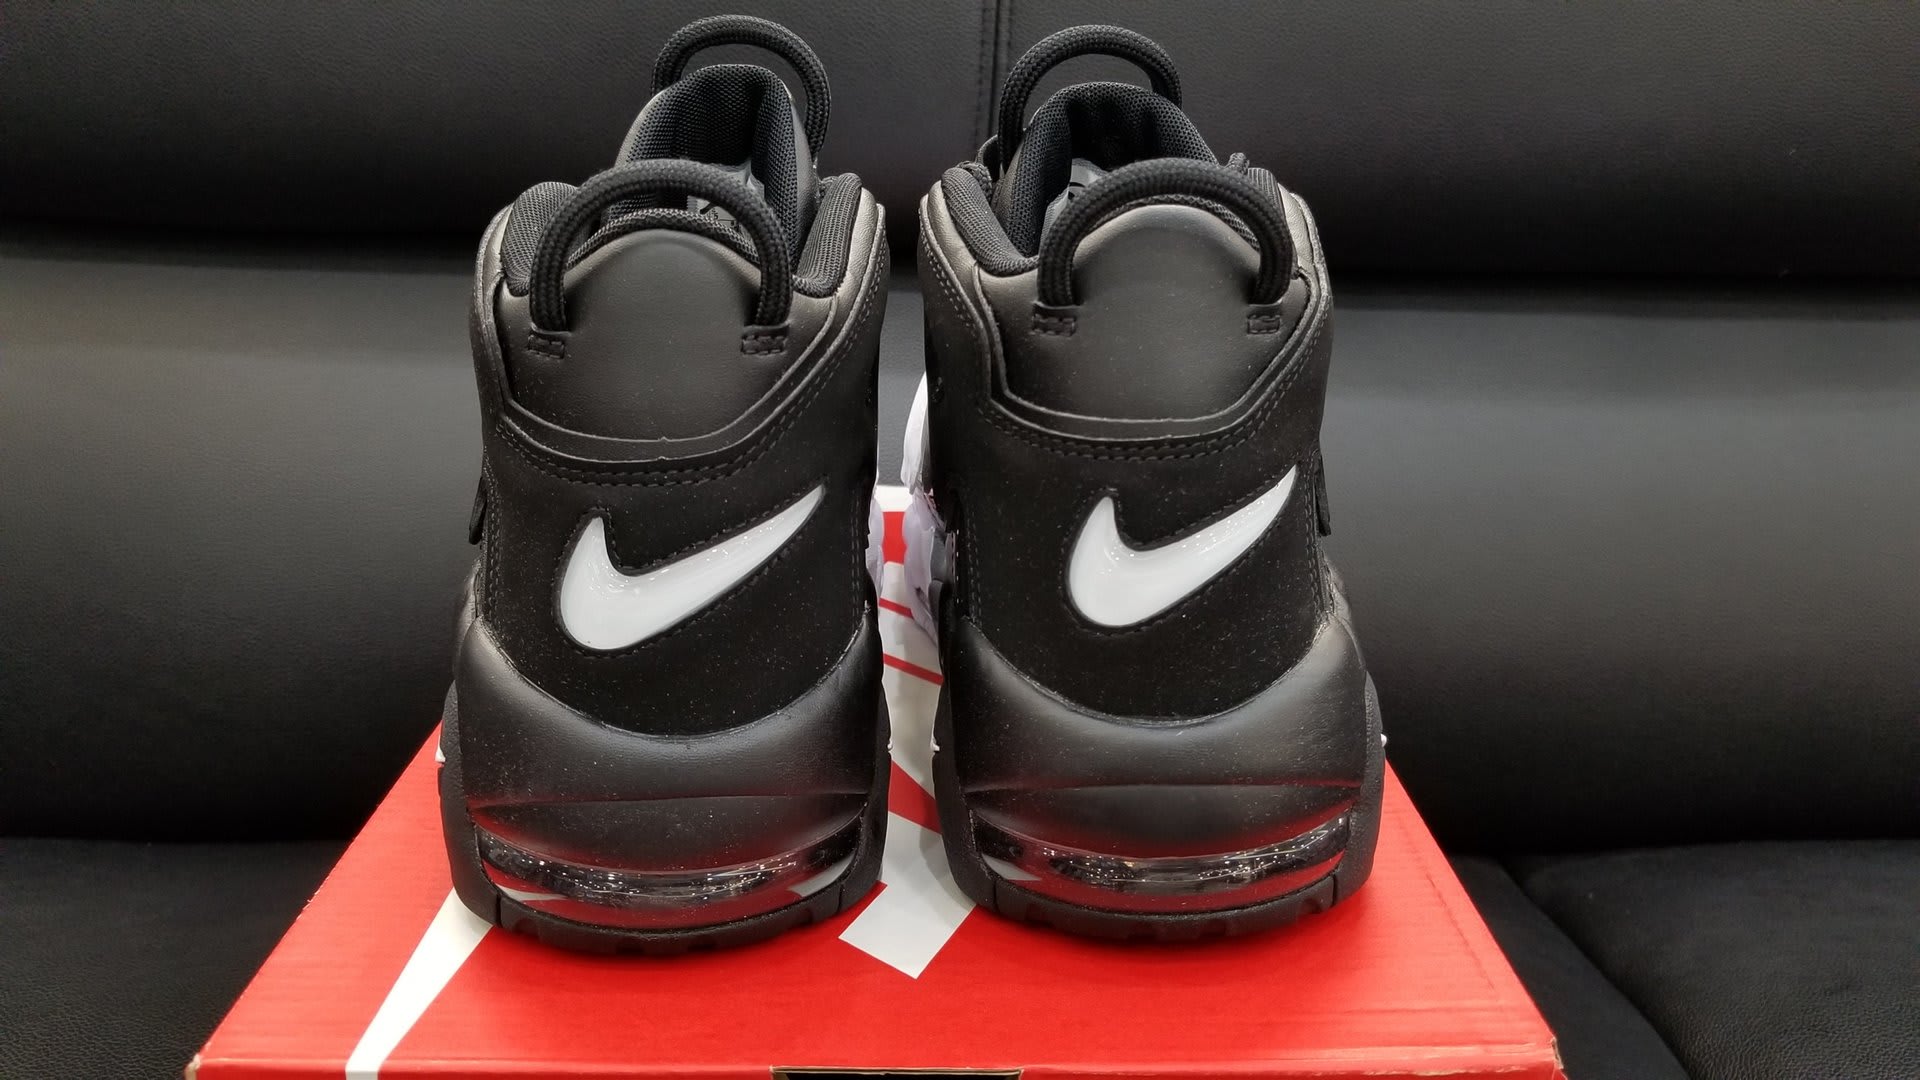 Nike Air More Uptempo Tri-Color Black Grey White Release Date Heel 921948 002